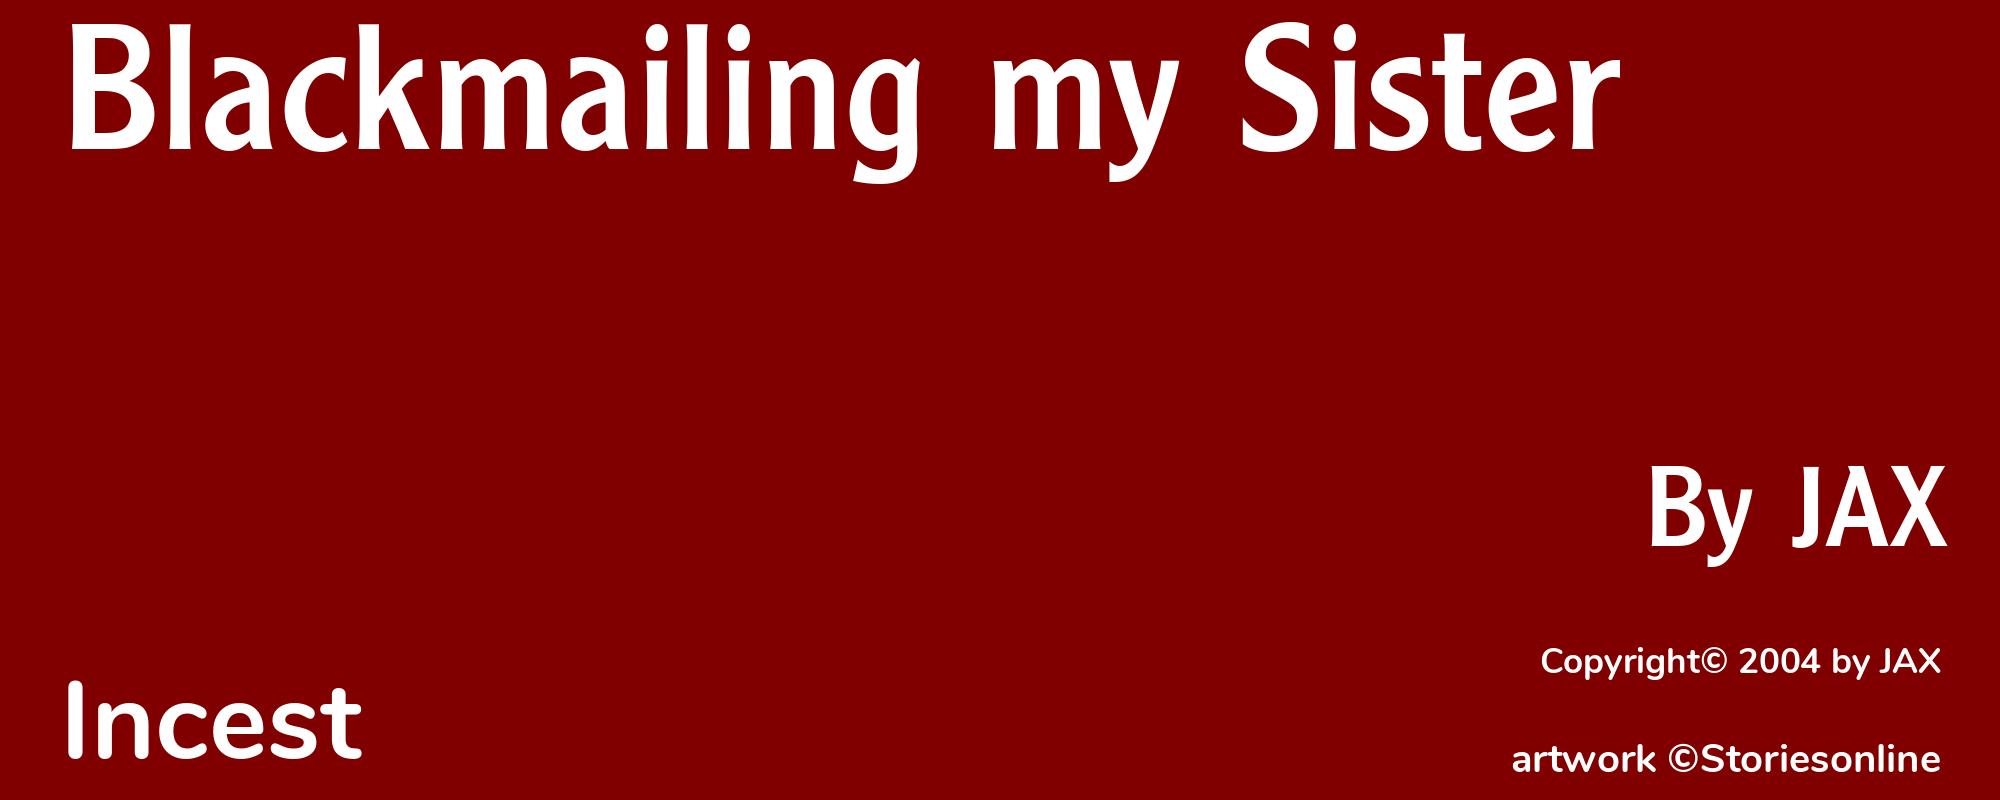 Blackmailing my Sister - Cover